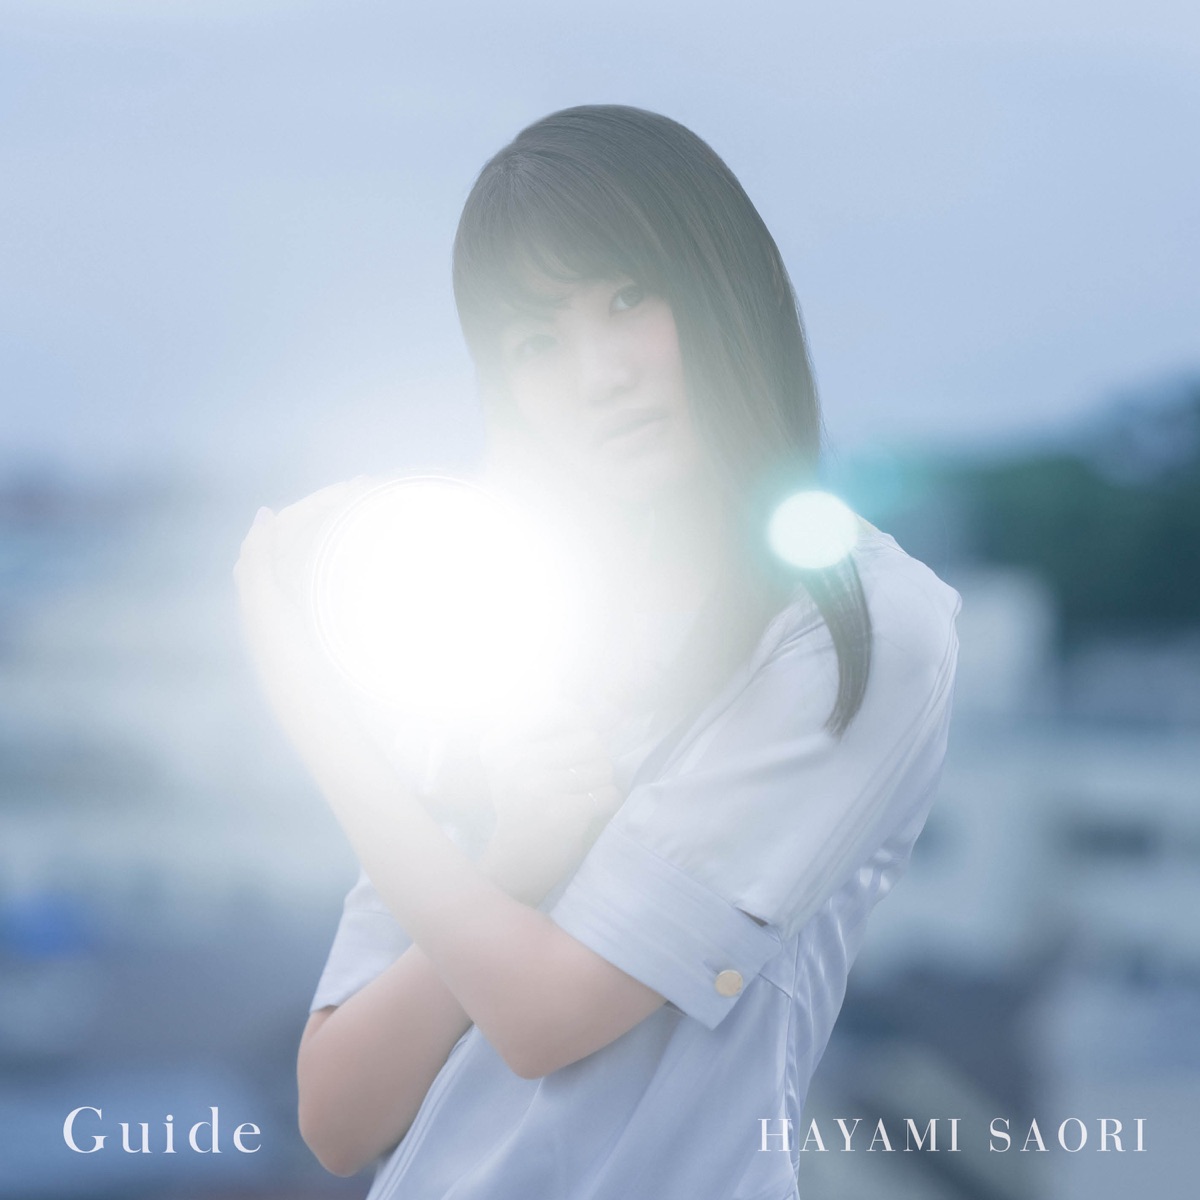 Cover art for『Saori Hayami - Guide』from the release『Guide